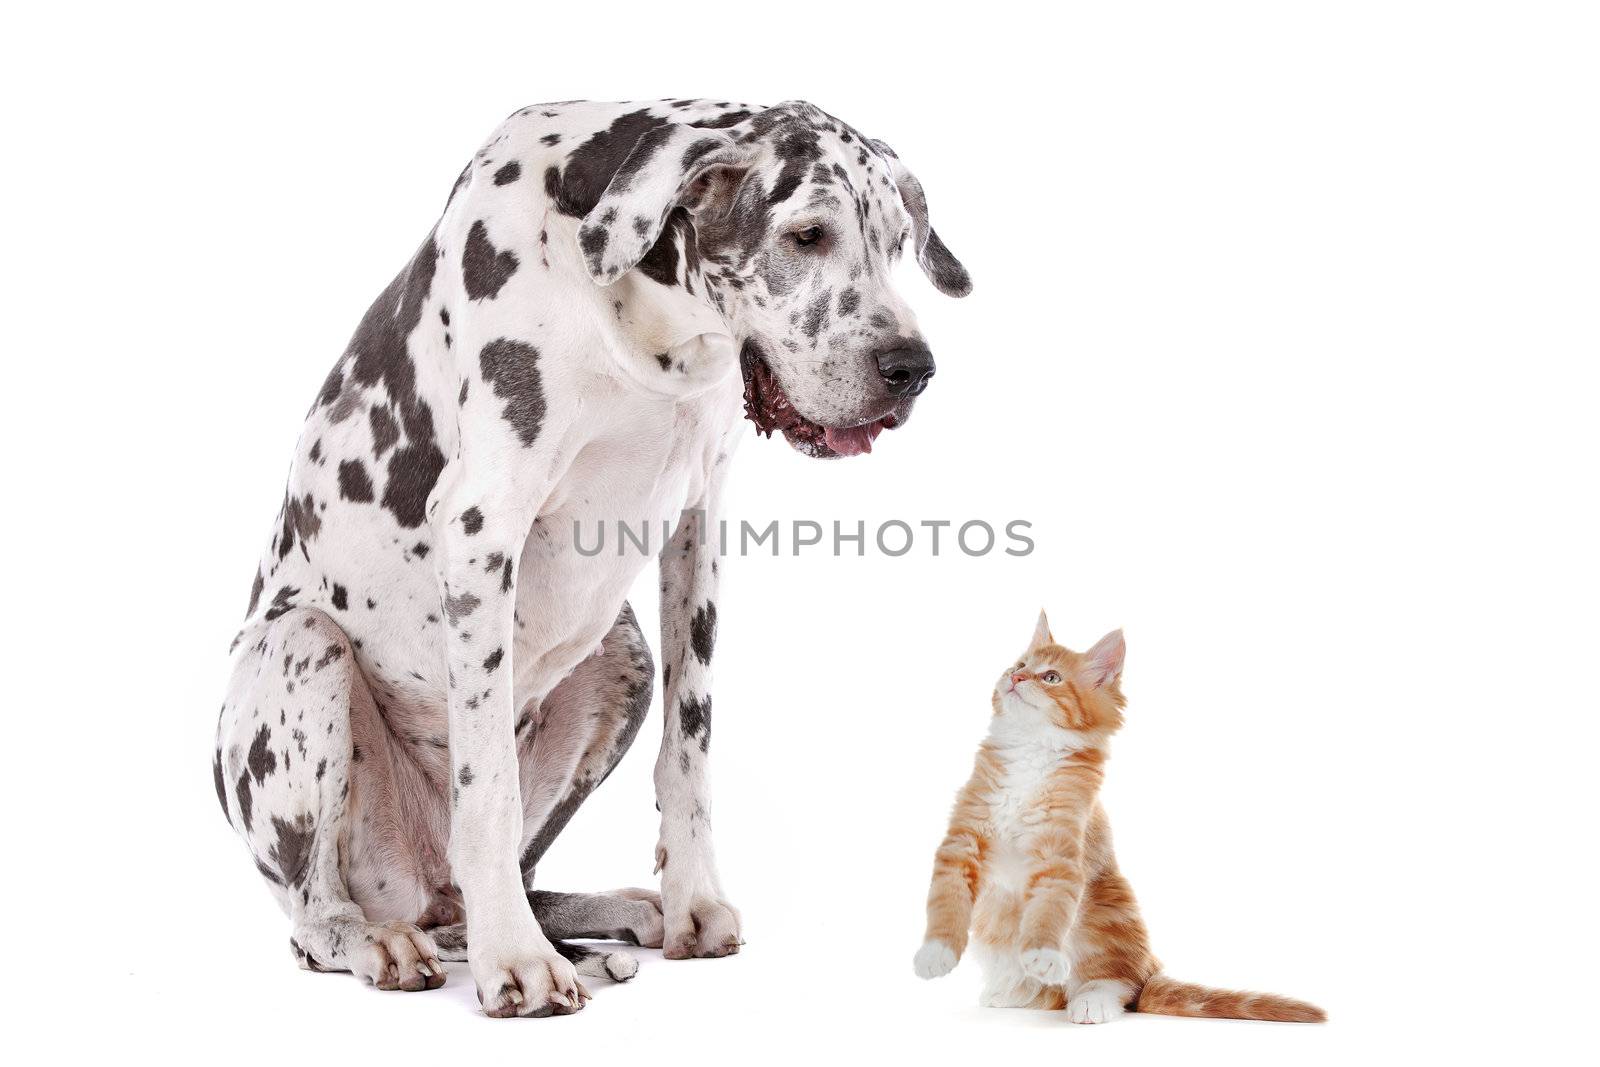 A dog and a cat in front of a white background